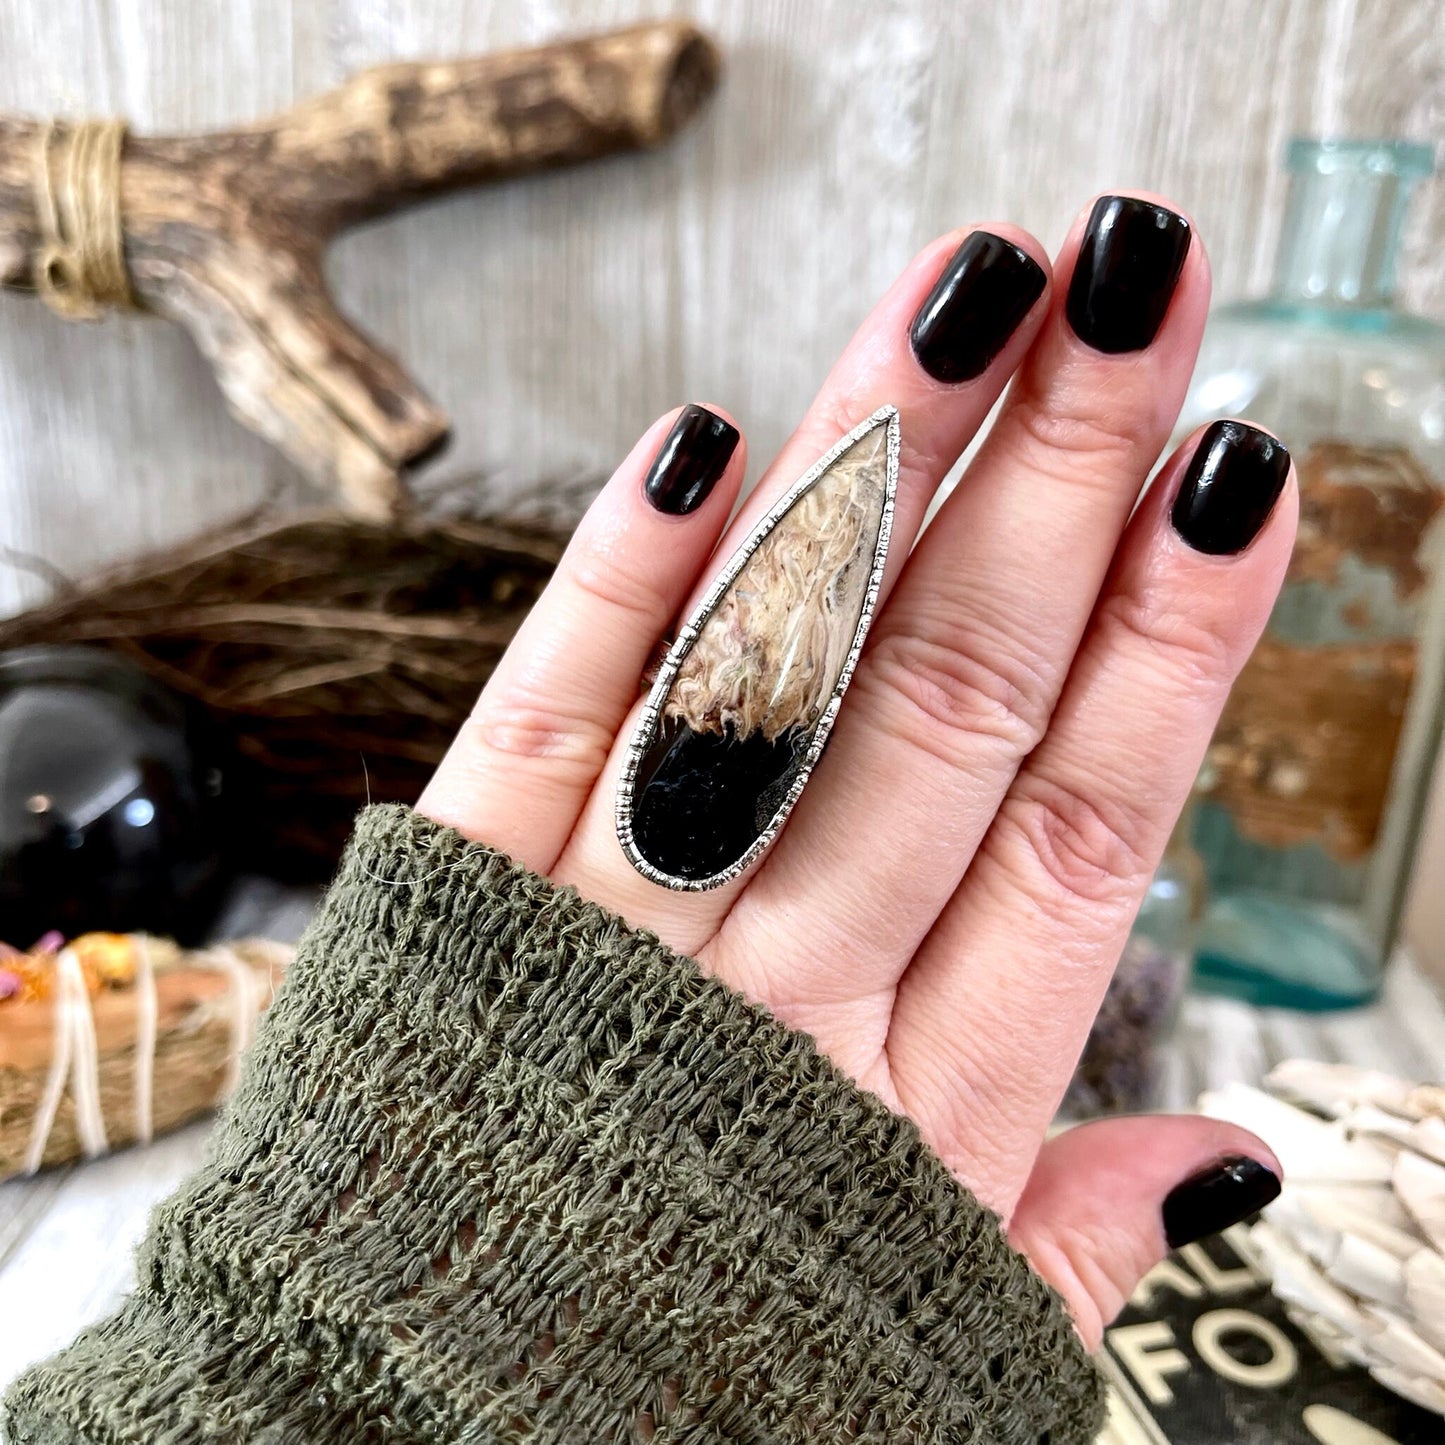 Unique Size 7 Large Fossilized Palm Root Statement Ring in Fine Silver / Foxlark Collection - One of a Kind